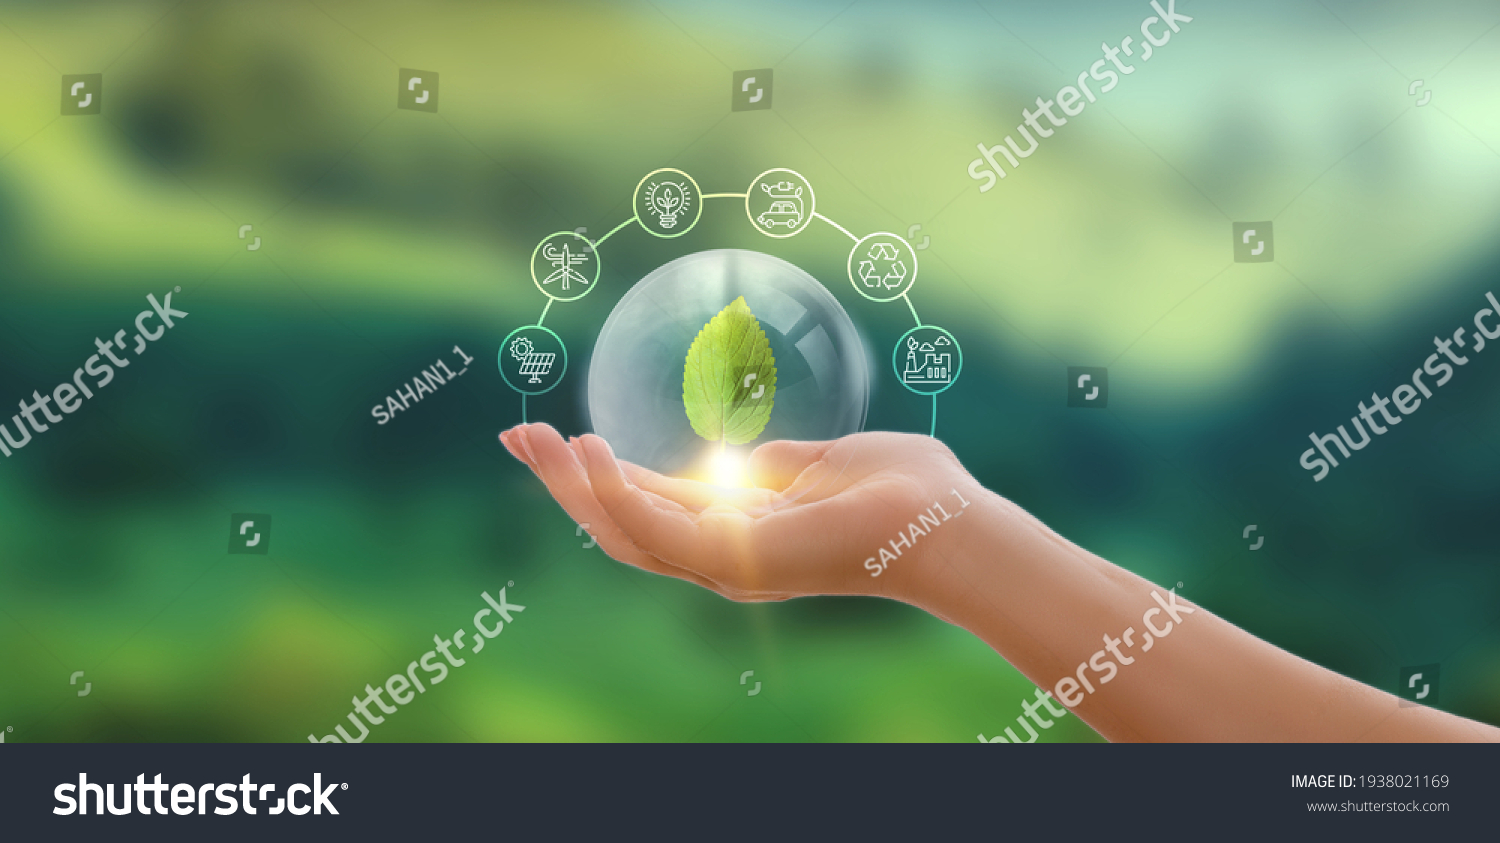 Hand holding green leaf with icons energy sources for renewable, sustainable development. Ecology concept. #1938021169